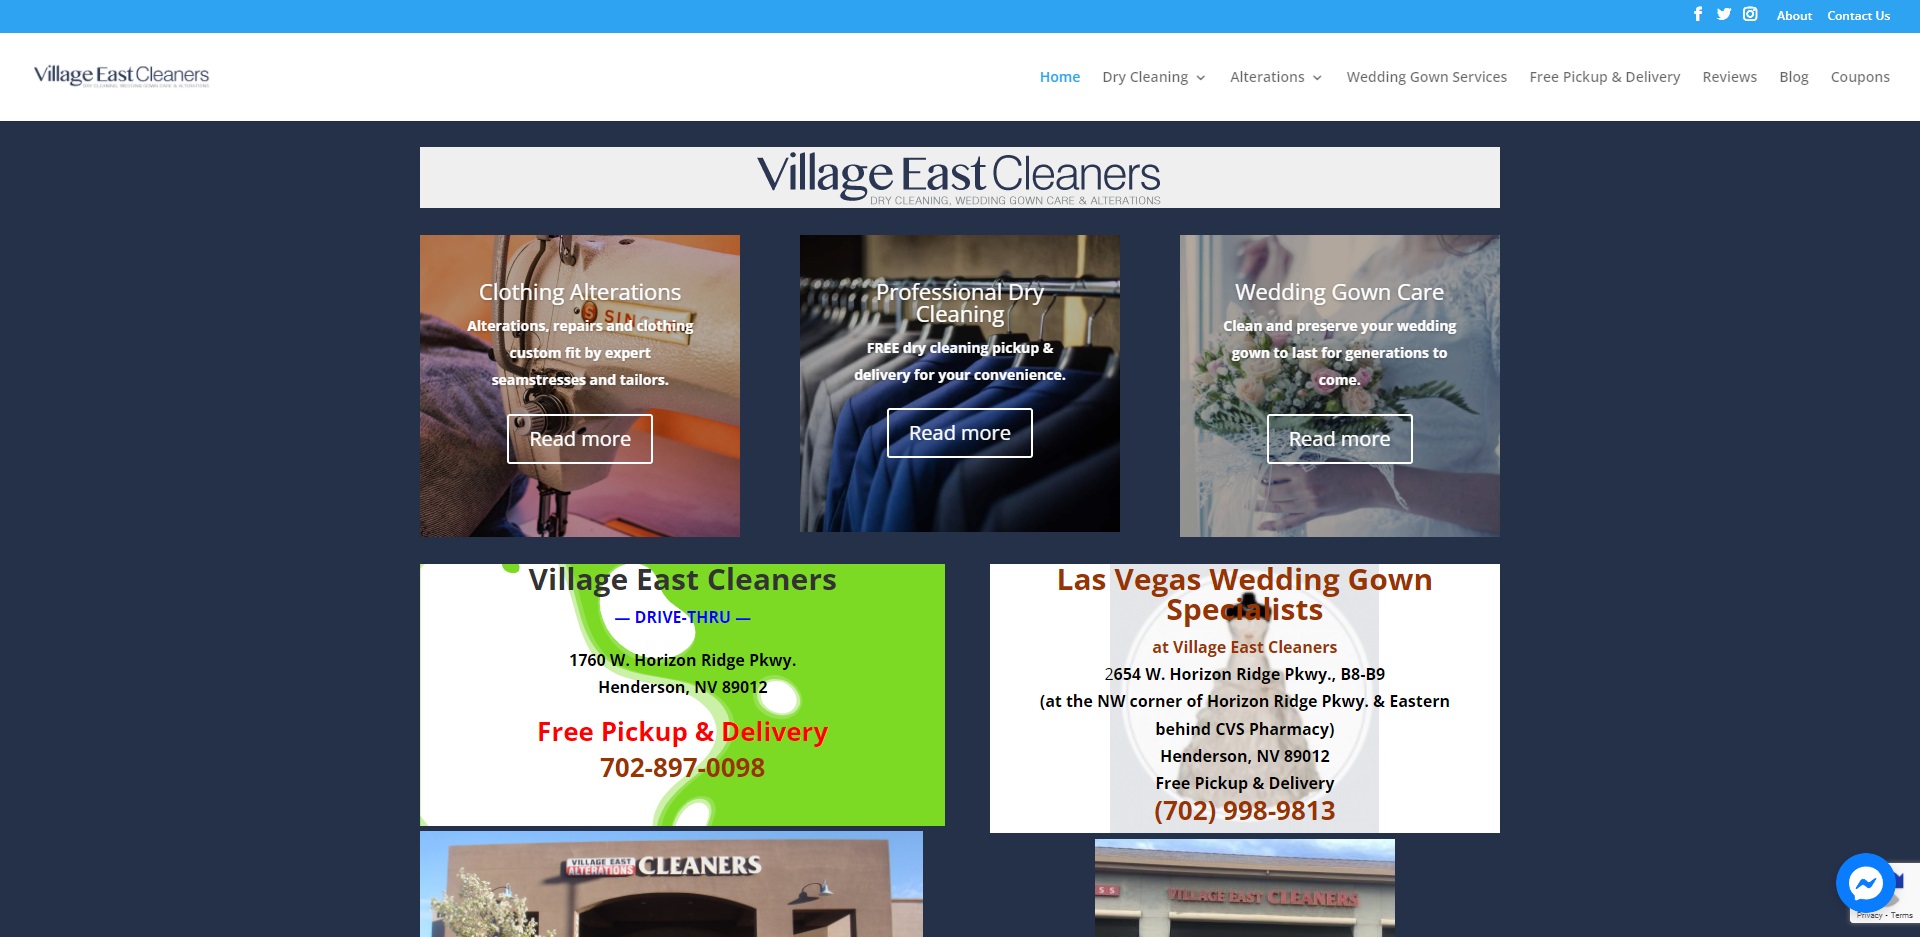 The Best Dry Cleaners in Henderson, NV